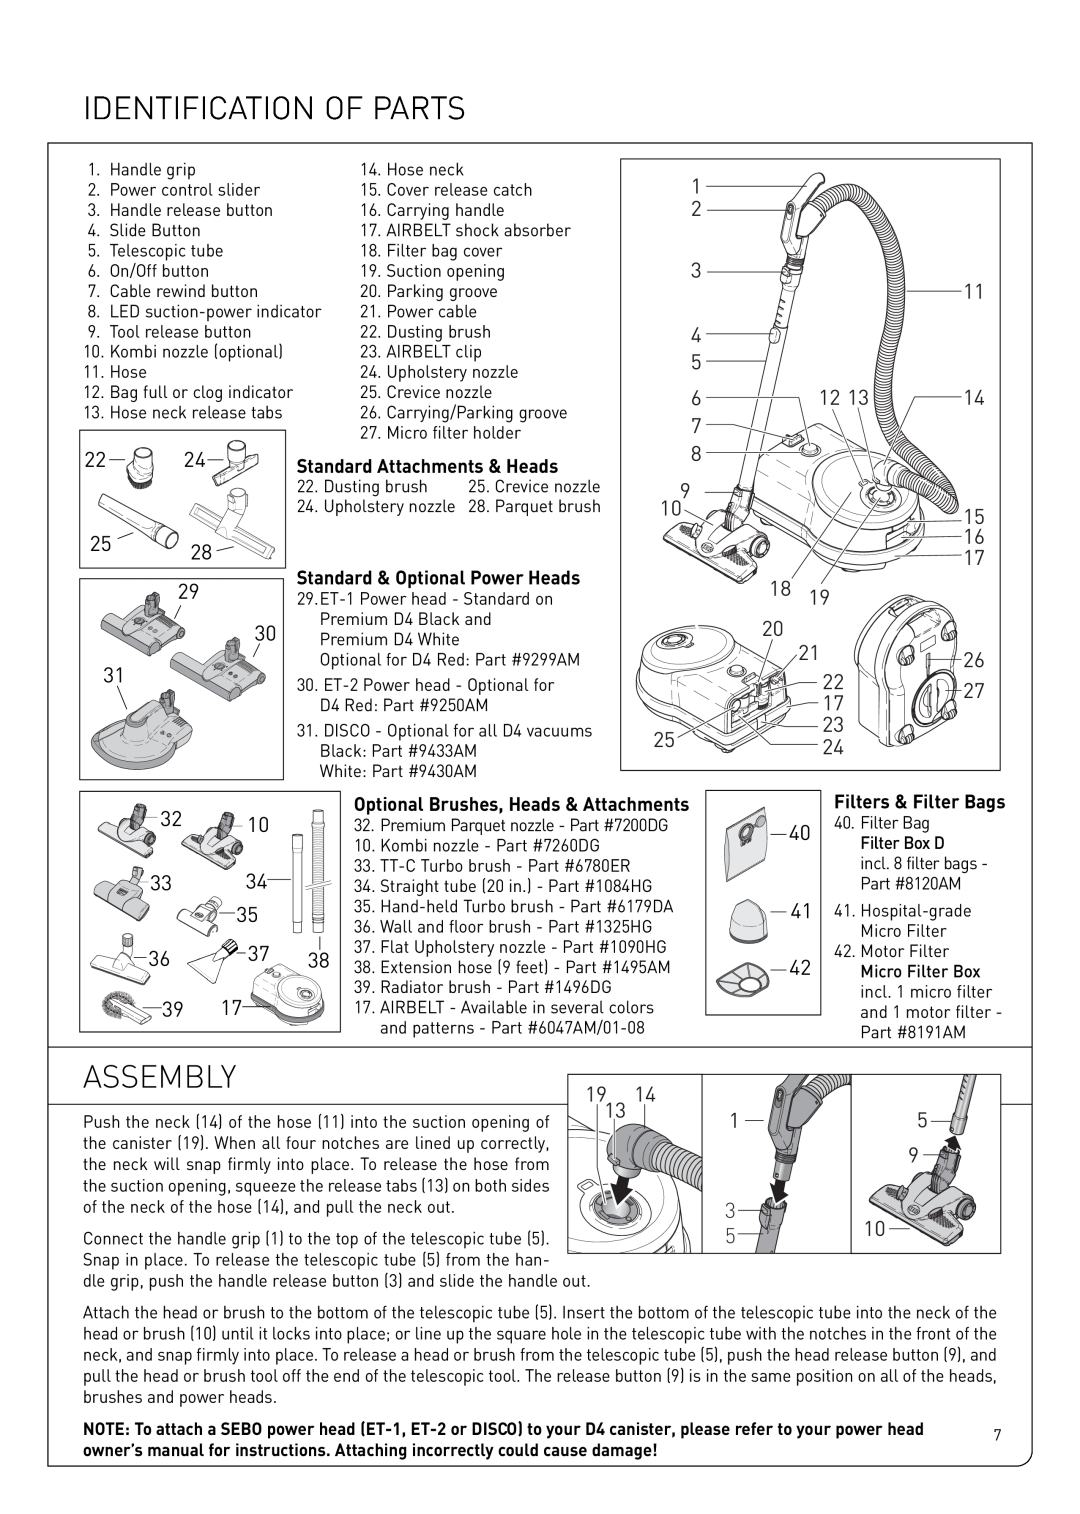 Sebo Airbelt D owner manual Assembly, Identification Of Parts 